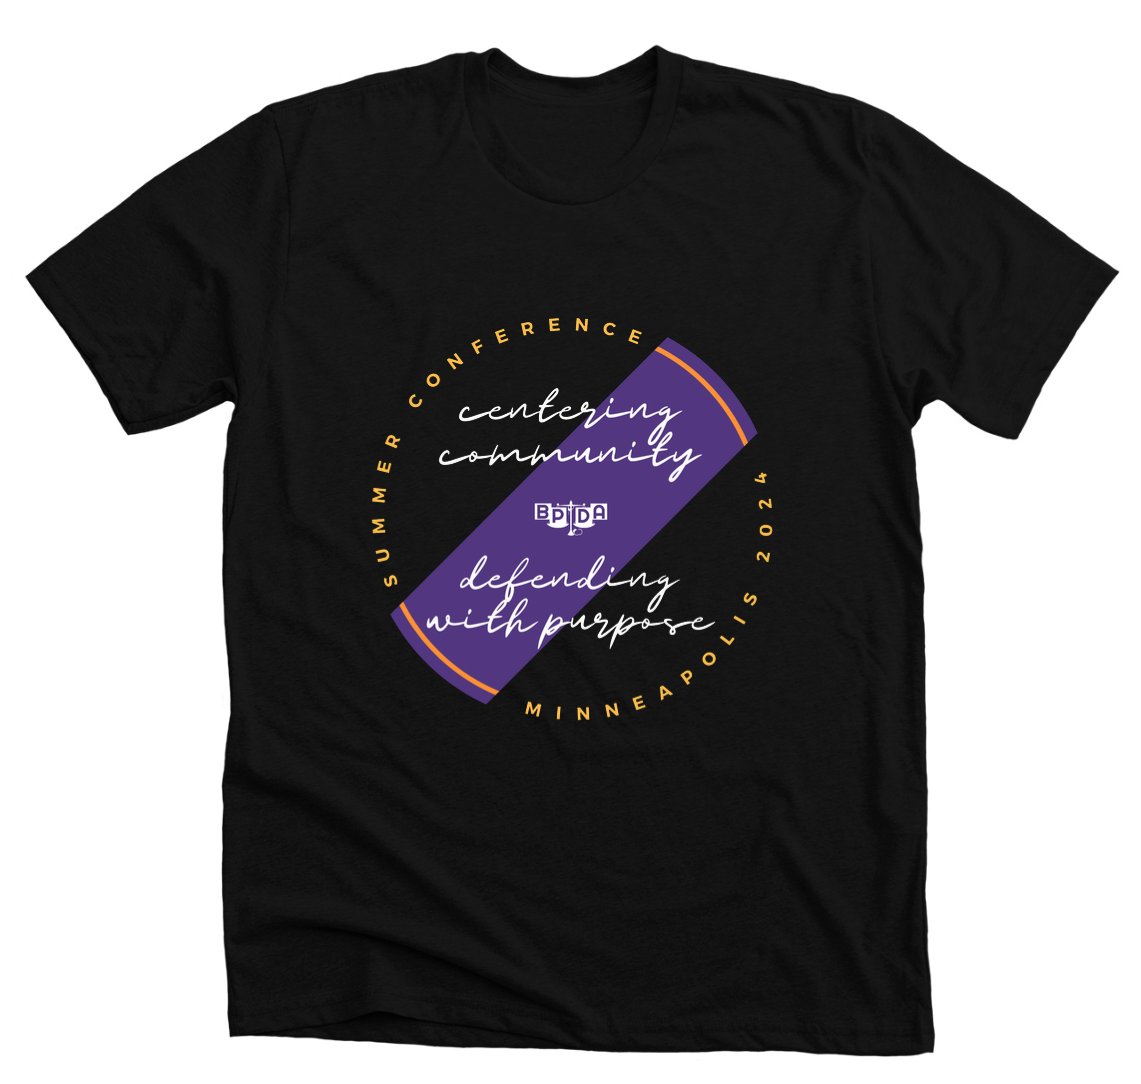 📣📣 The 2024 Summer Conference t-shirt is here! 📣📣 Get yours early! Order your t-shirt before June 1 so you can wear it on the first day of the conference. Available in sizes XS to 4XL. bpda.blackdefender.org/Conf-Tee-24